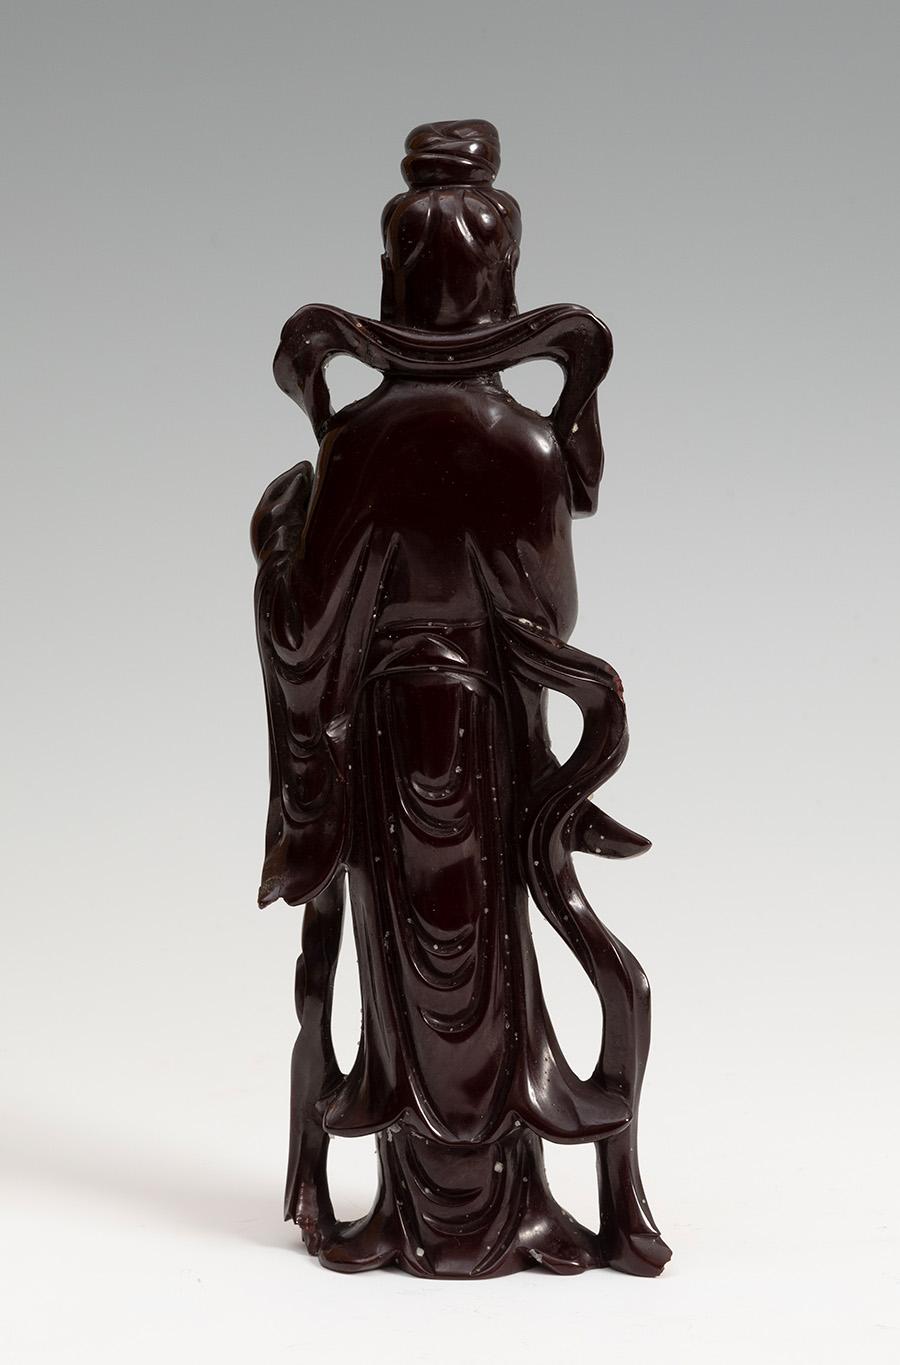 Mid-20th century Chinese hard-stone Guanyin figure sculpture.
 